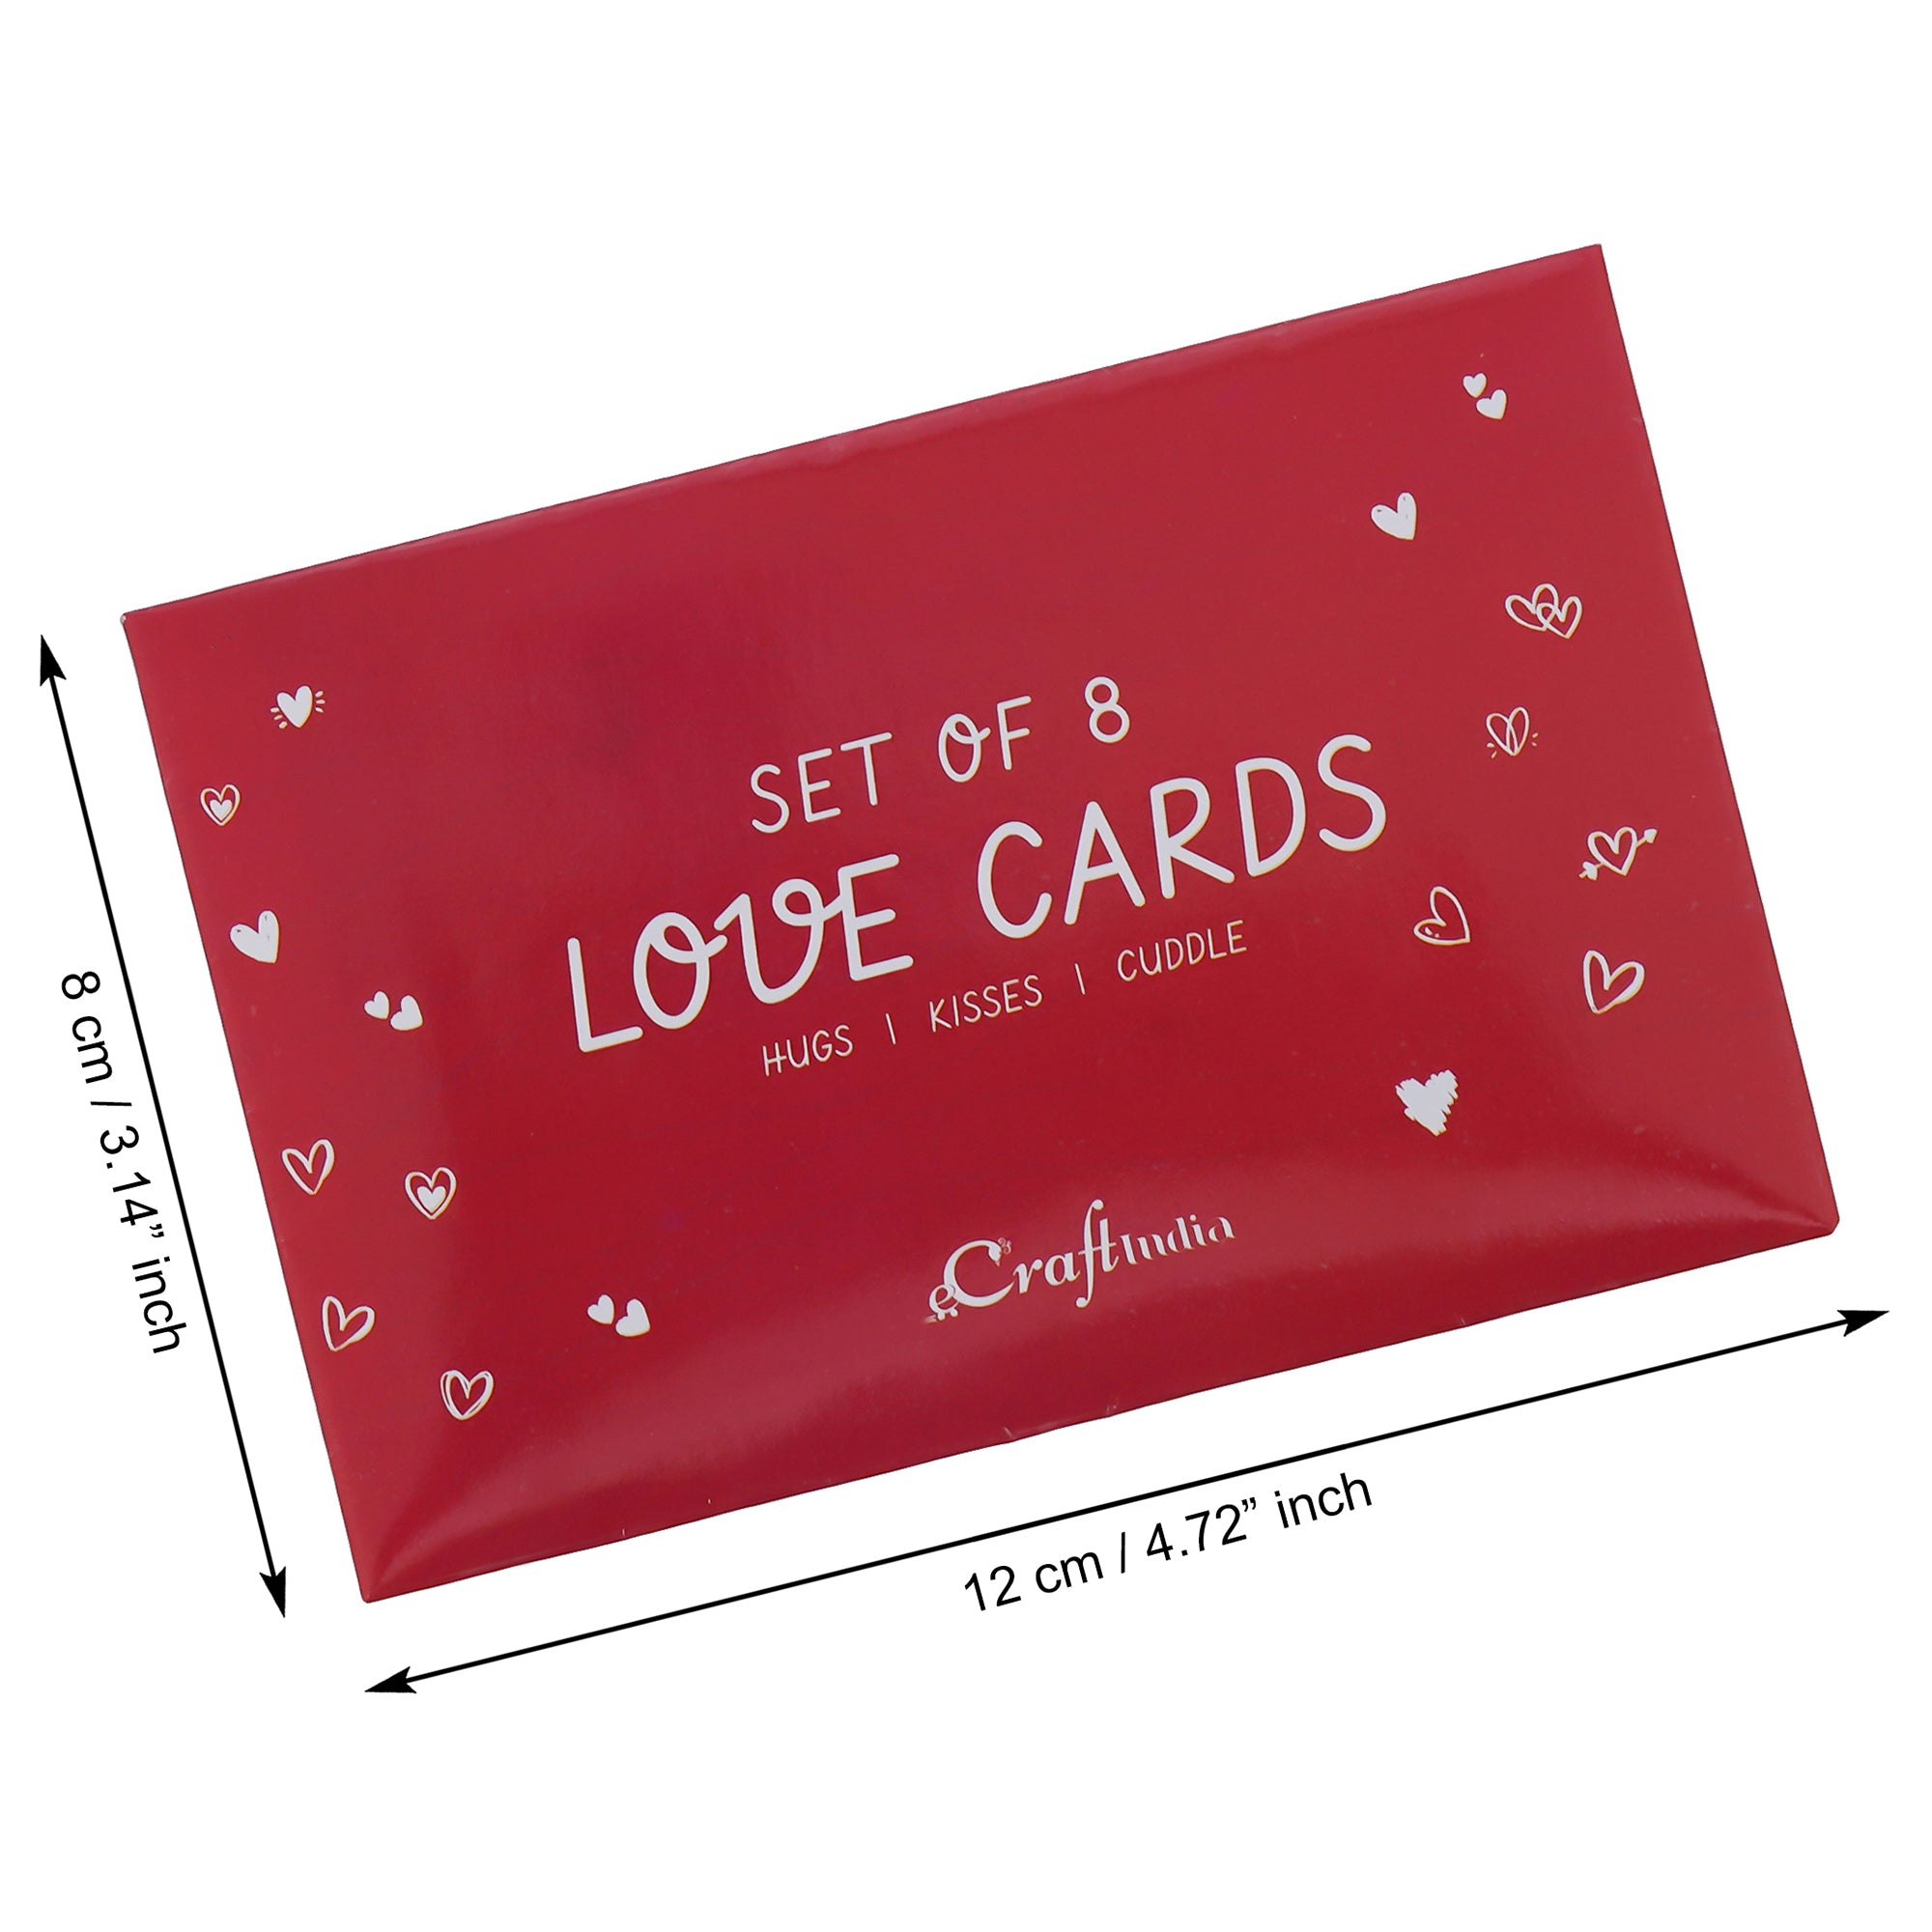 Valentine Combo of Pack of 8 Love Gift Cards, Hands Showcasing Red Heart Gift Set, Red Roses Bouquet and White, Red Teddy Bear Valentine's Rectangle Shaped Gift Box 2